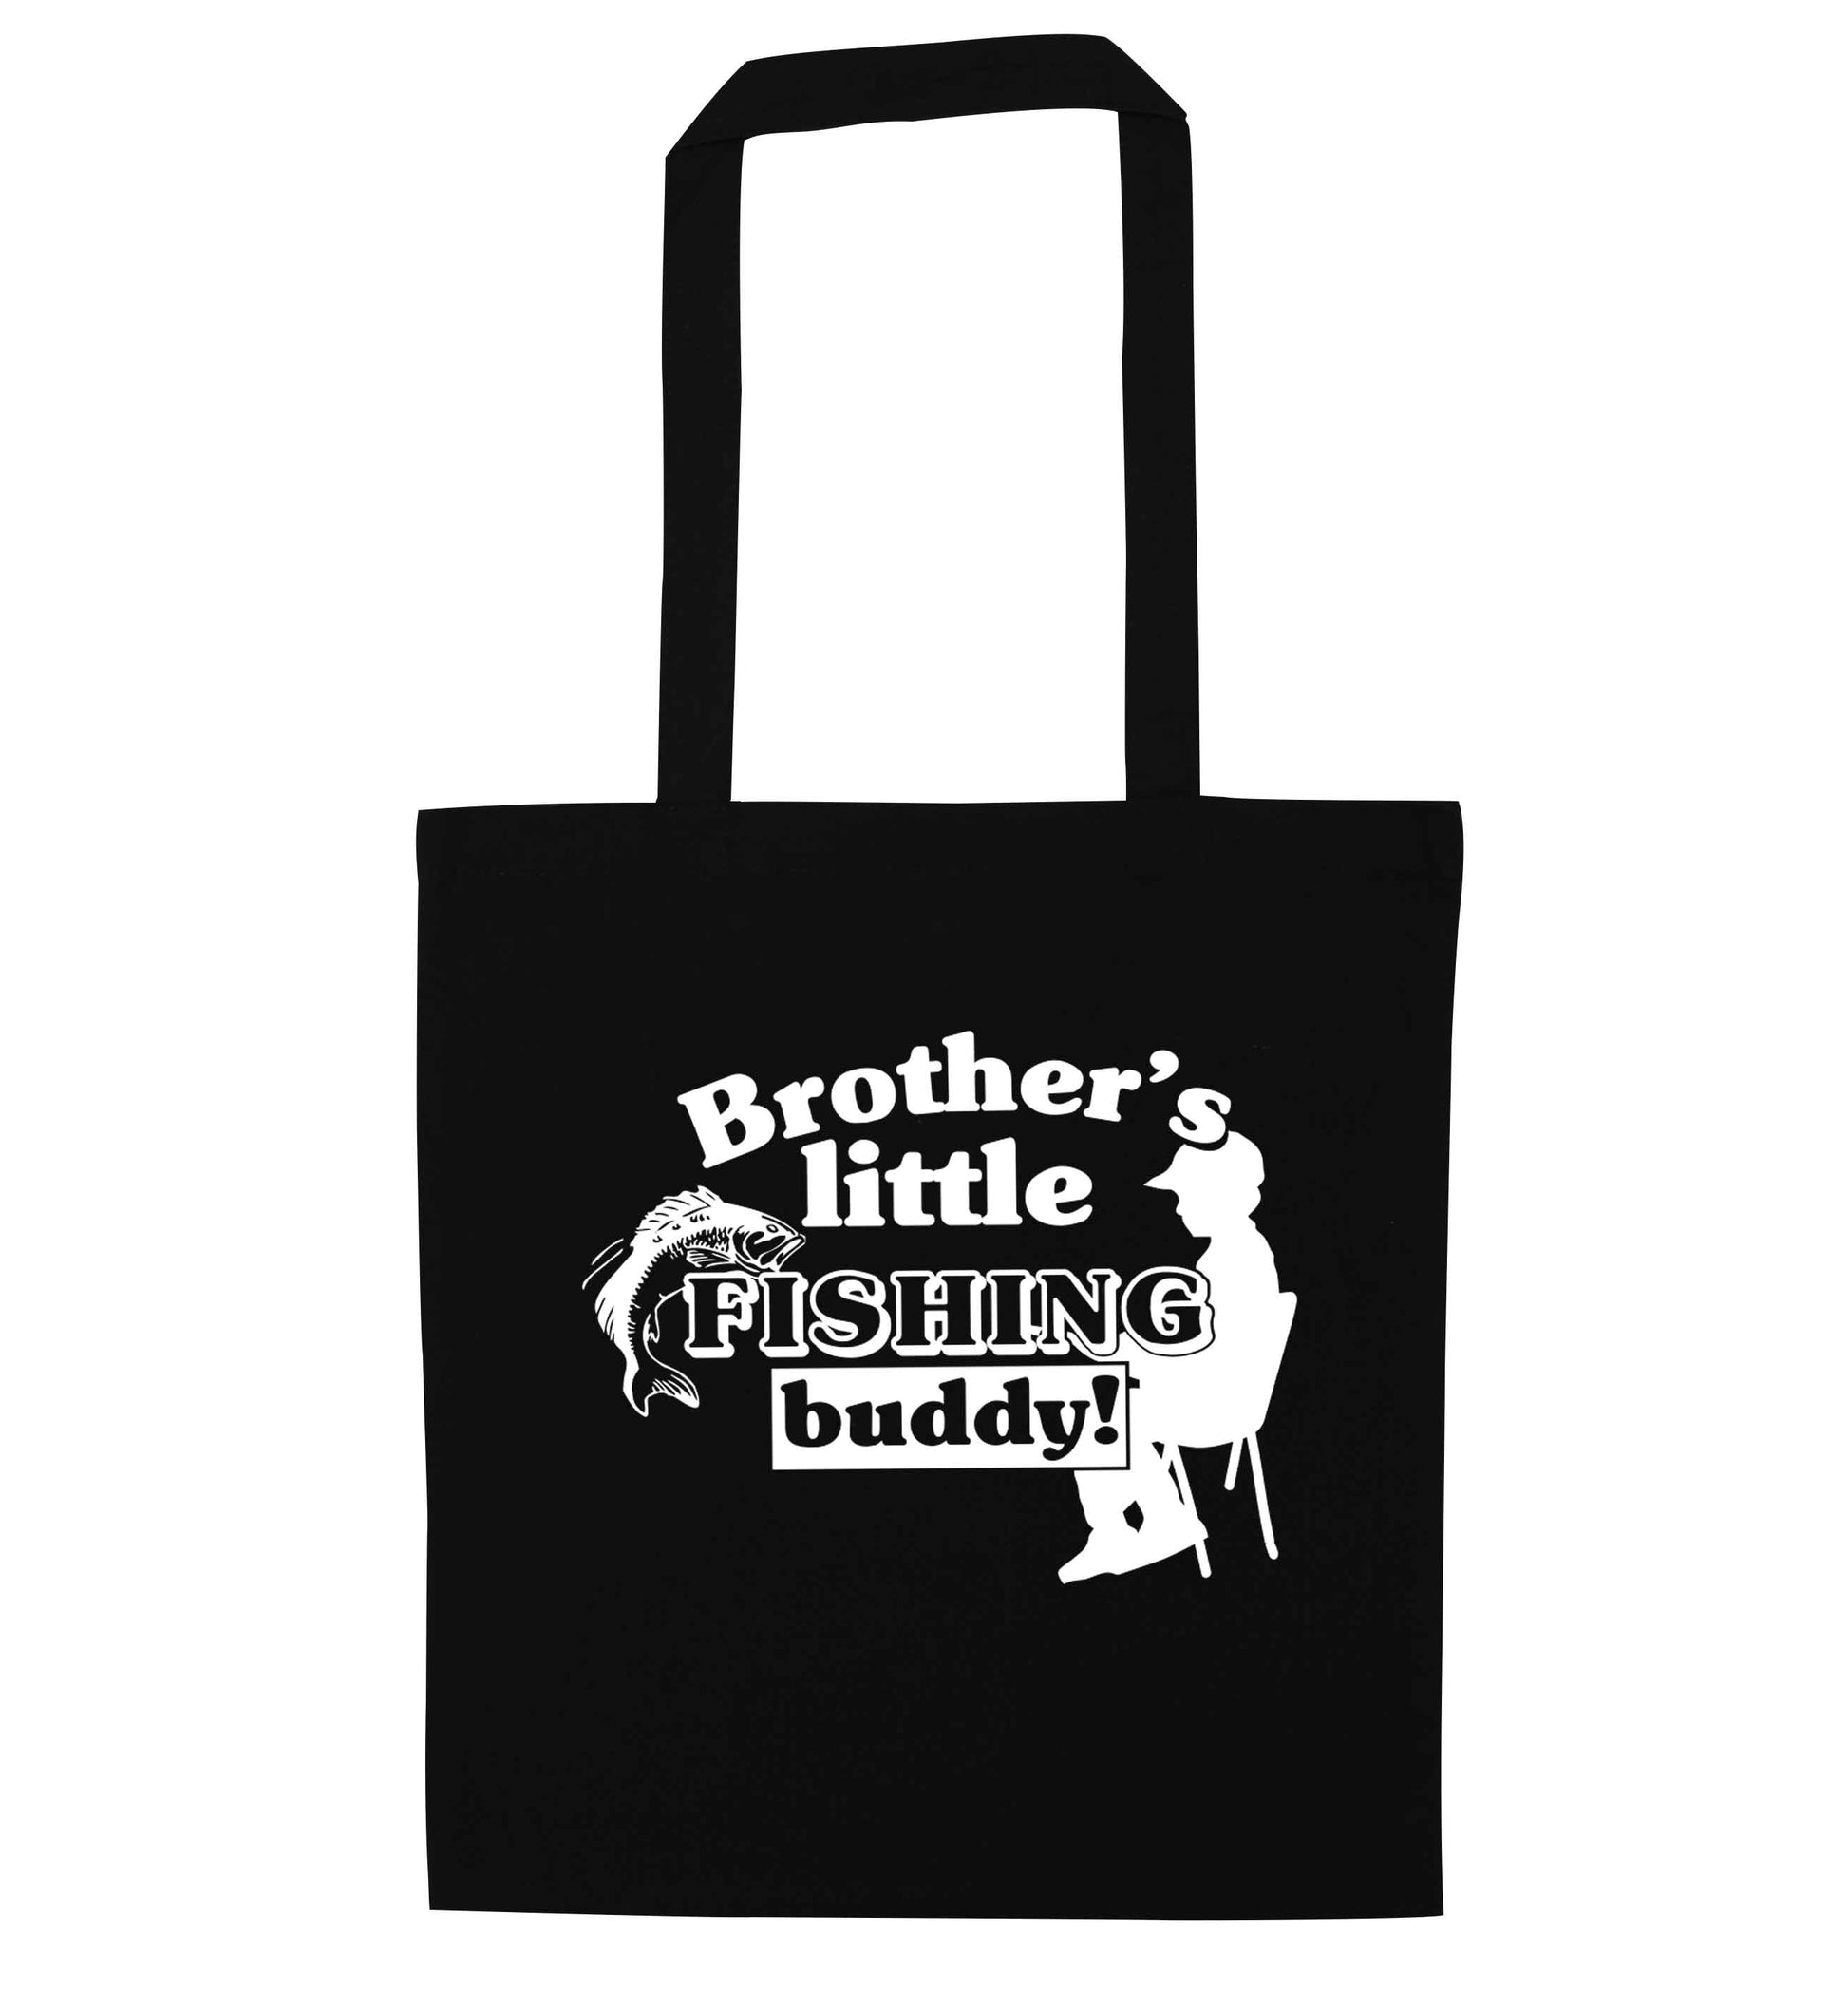 Brother's little fishing buddy black tote bag